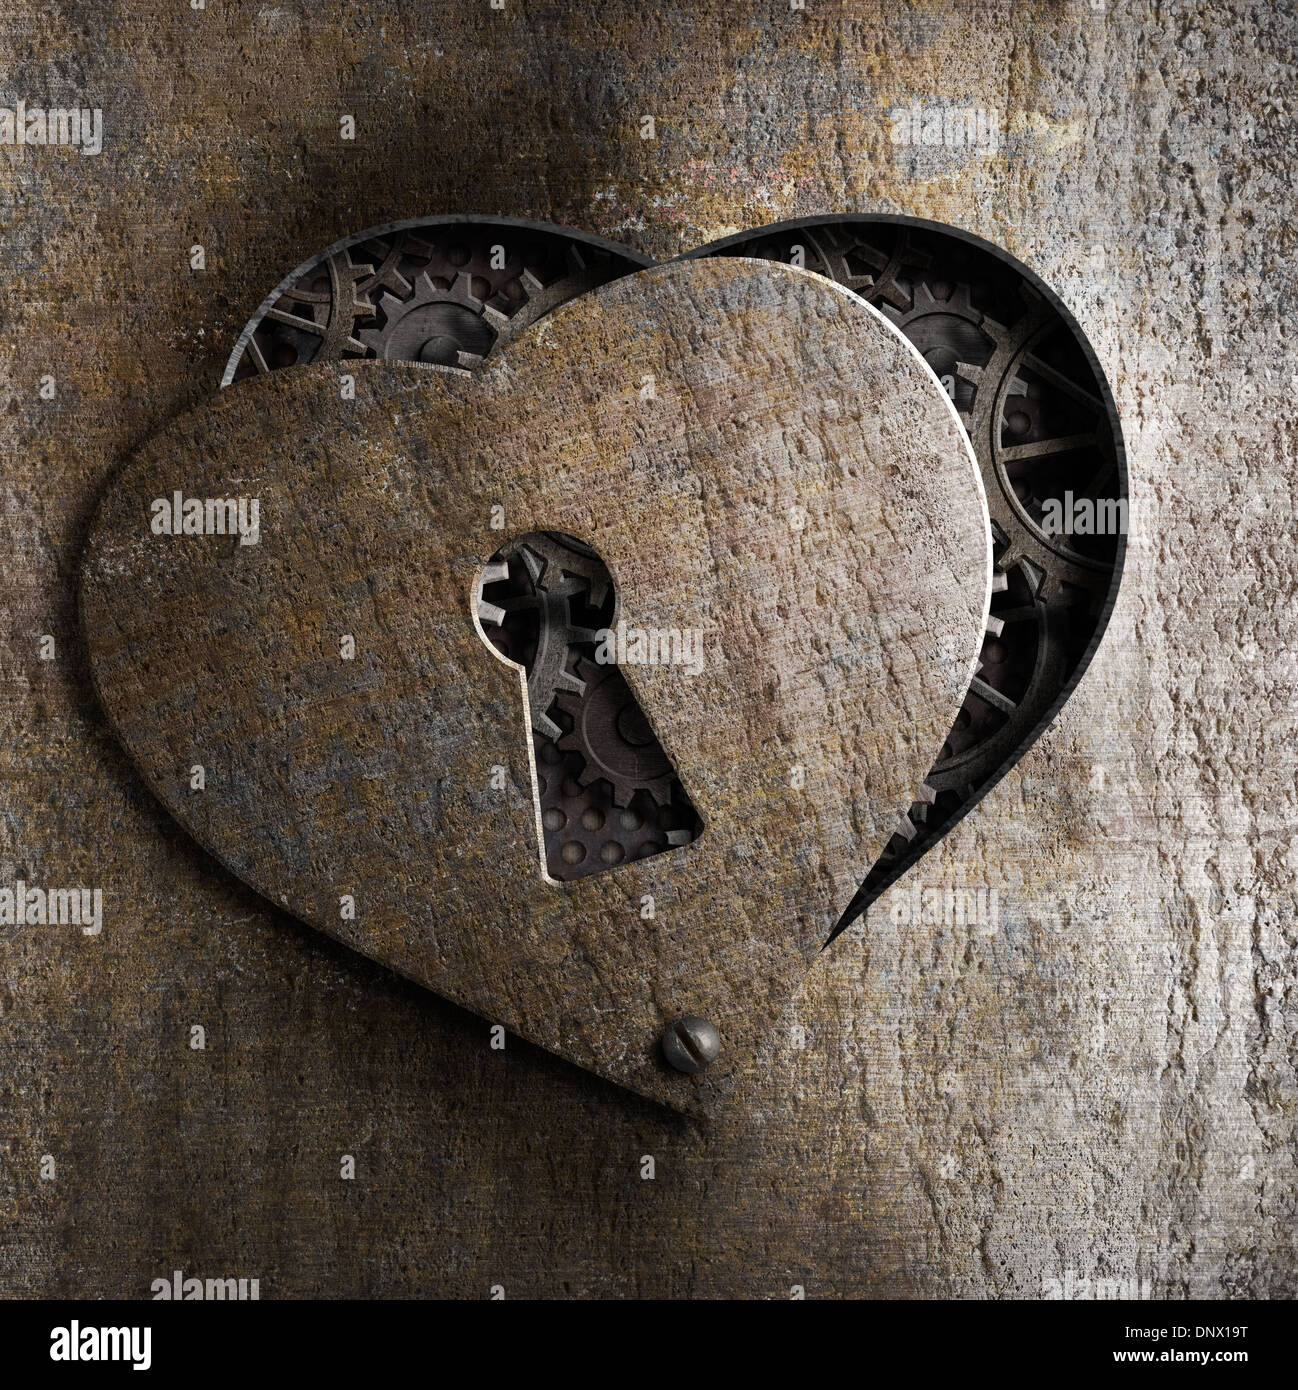 metal heart with keyhole Stock Photo